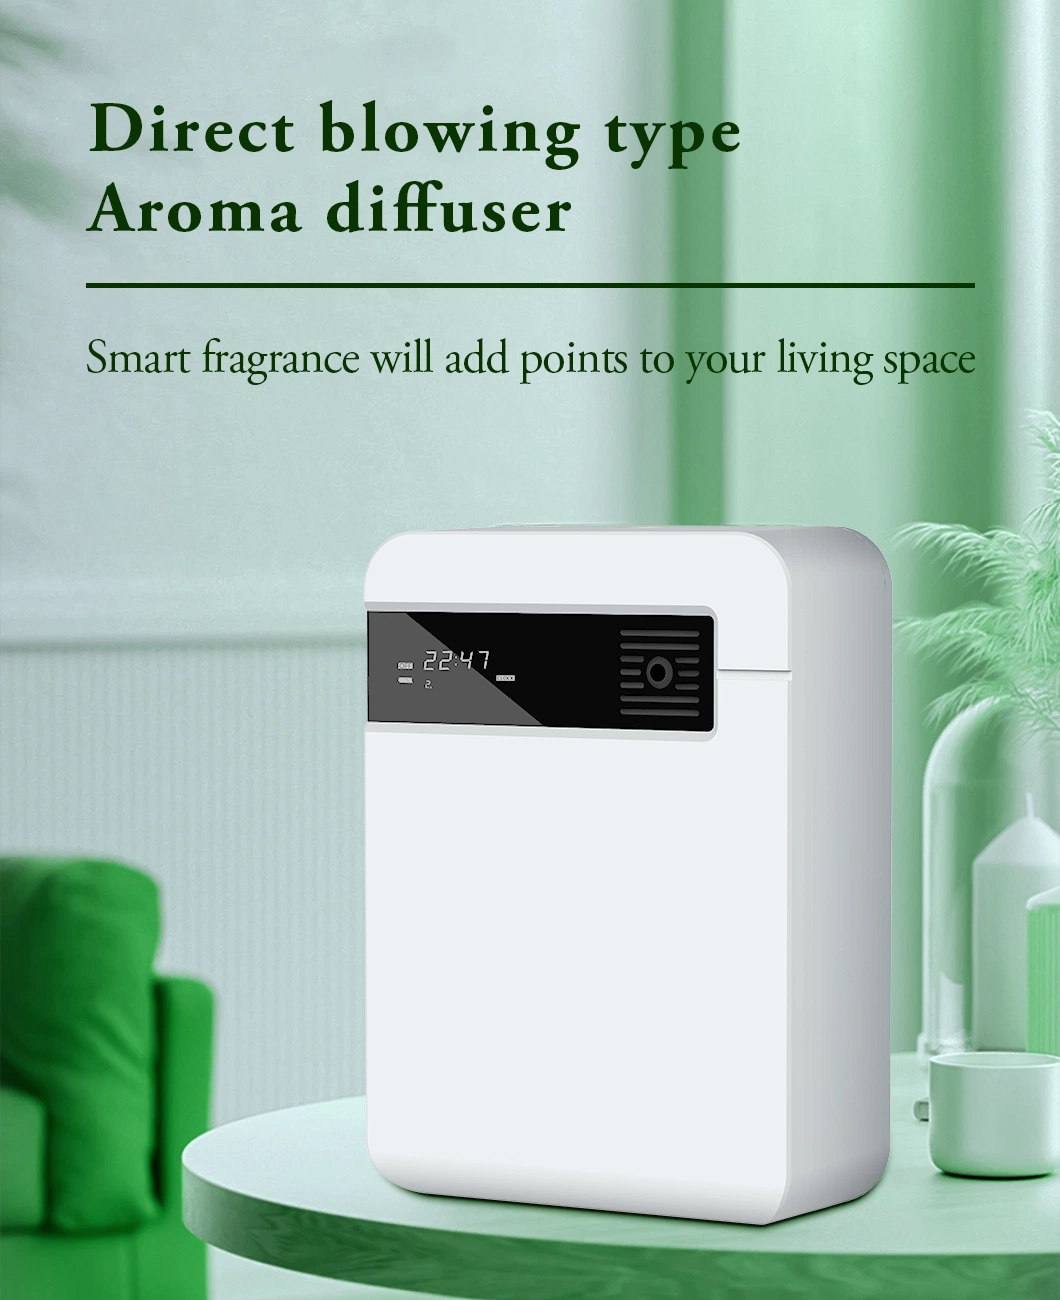 WiFi Air Perfume Fragrance Diffuser Machine Smart Home Room Hotel Wall Mount Plug in 200ml Essential Oil Scent Aroma Diffuser